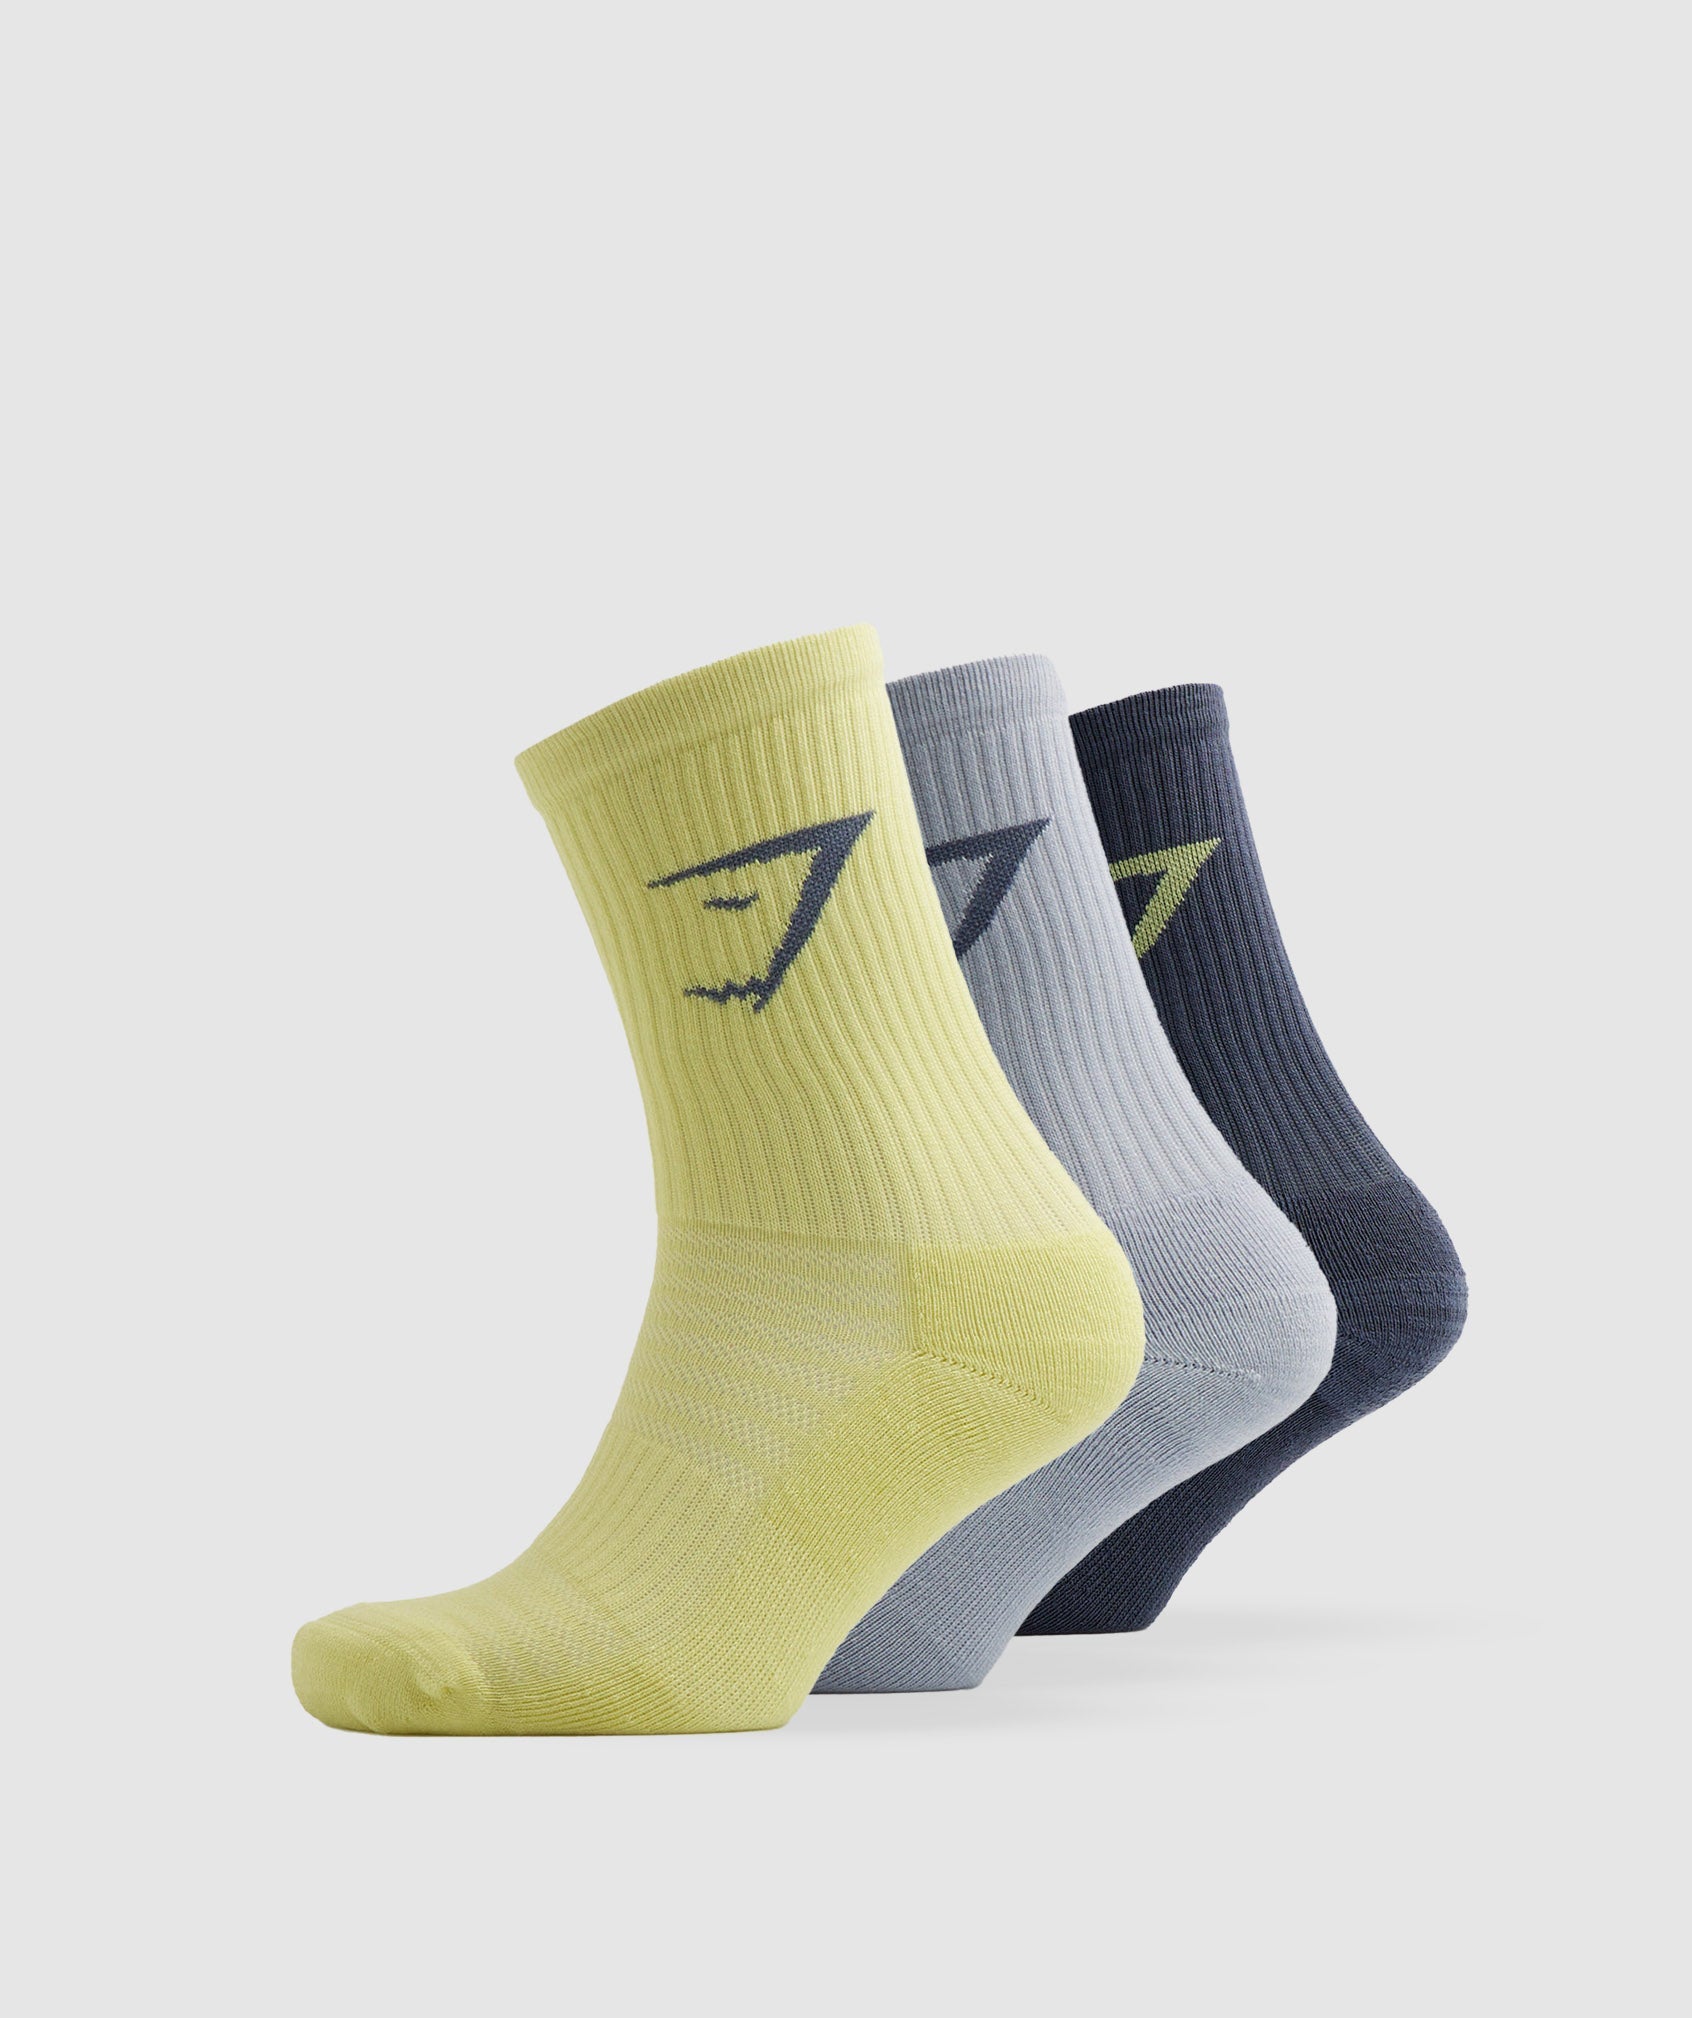 Crew Socks 3pk in Green/Grey/Blue is out of stock